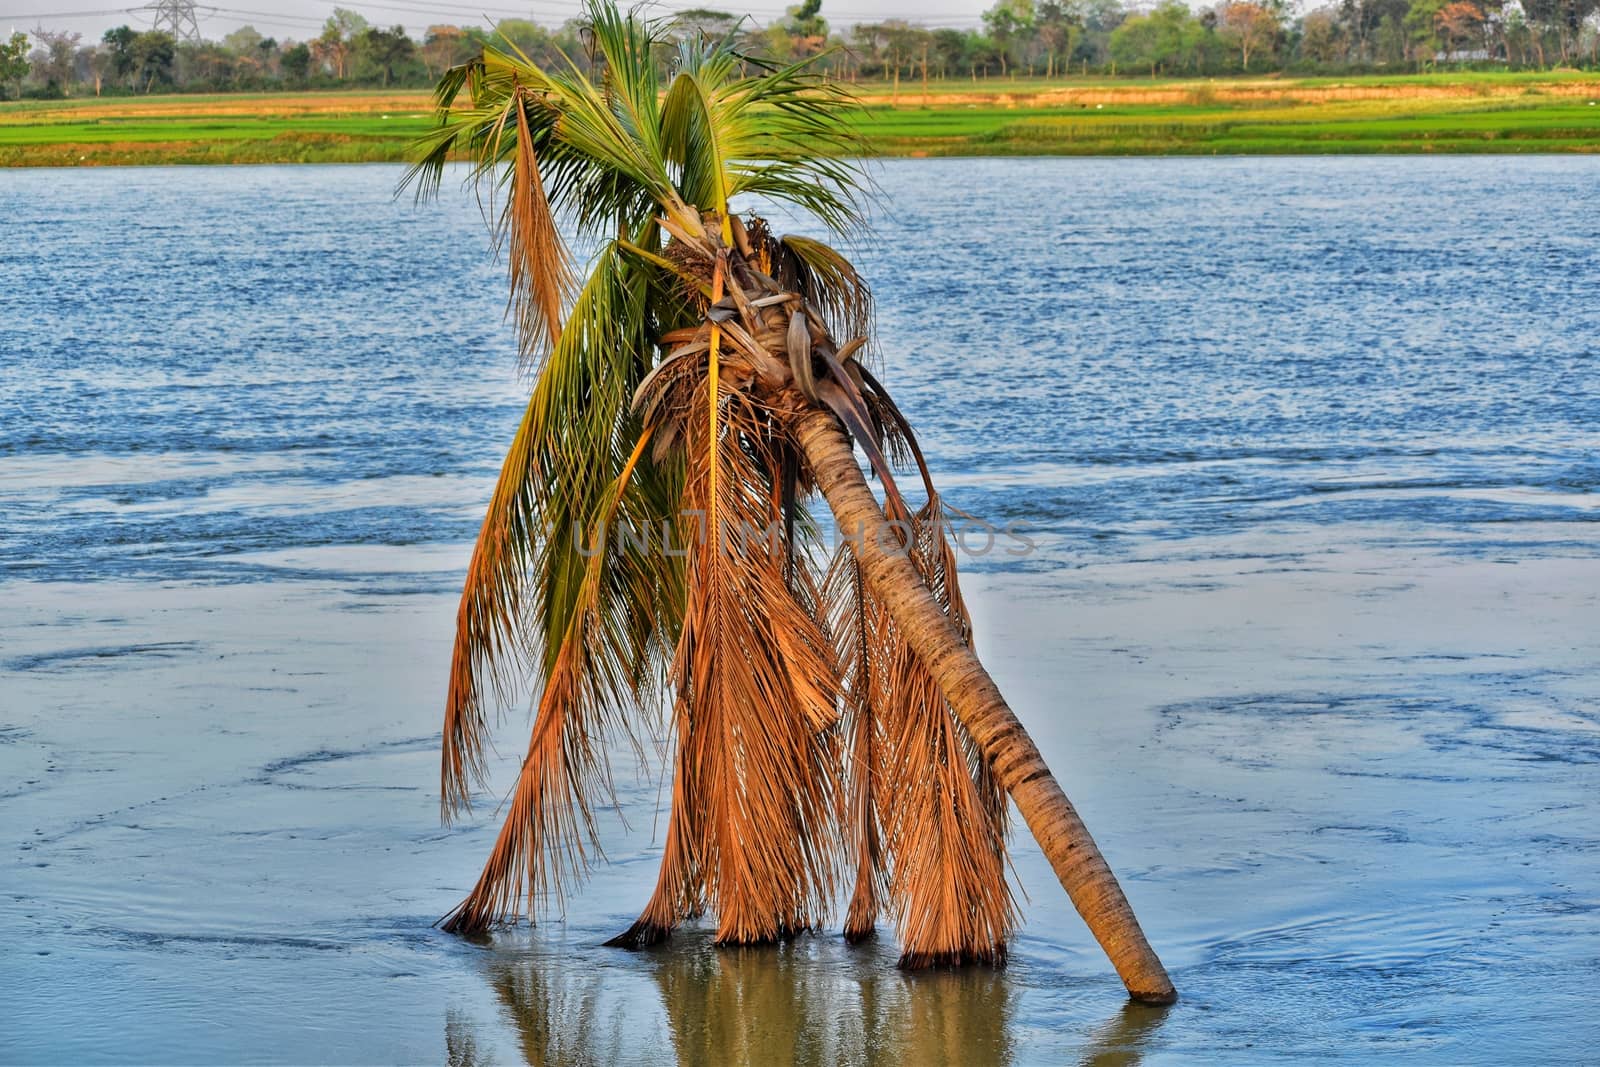 A bent coconut tree is seen submerged inside a river. A blue river is flowing and a meadow is present on the far bank of the river